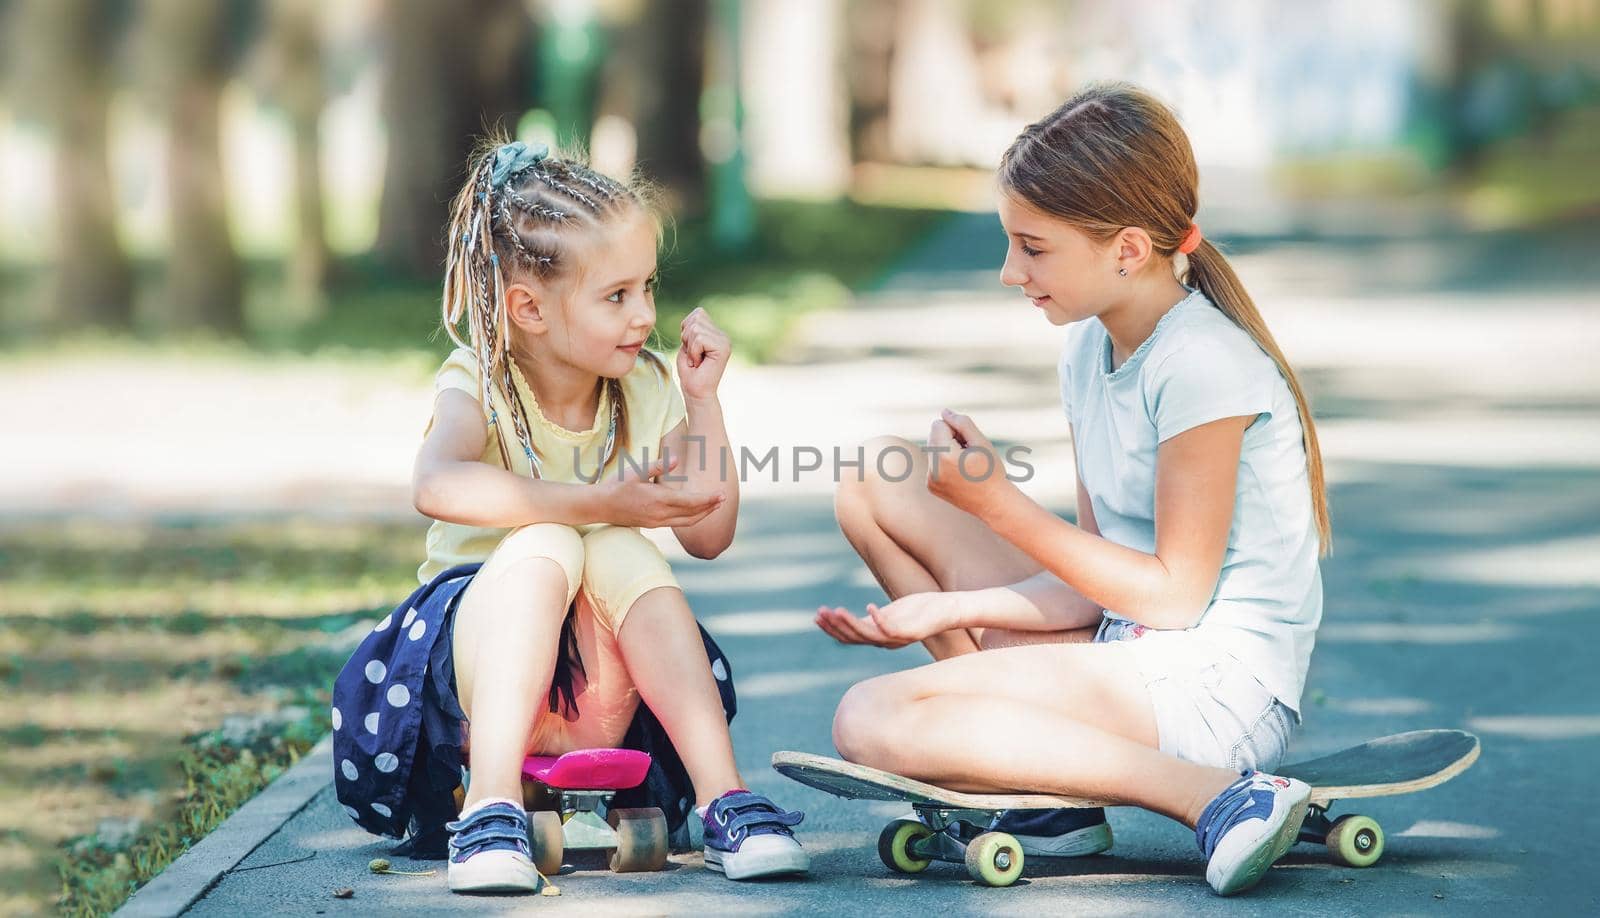 Girls with skateboards in the park by GekaSkr